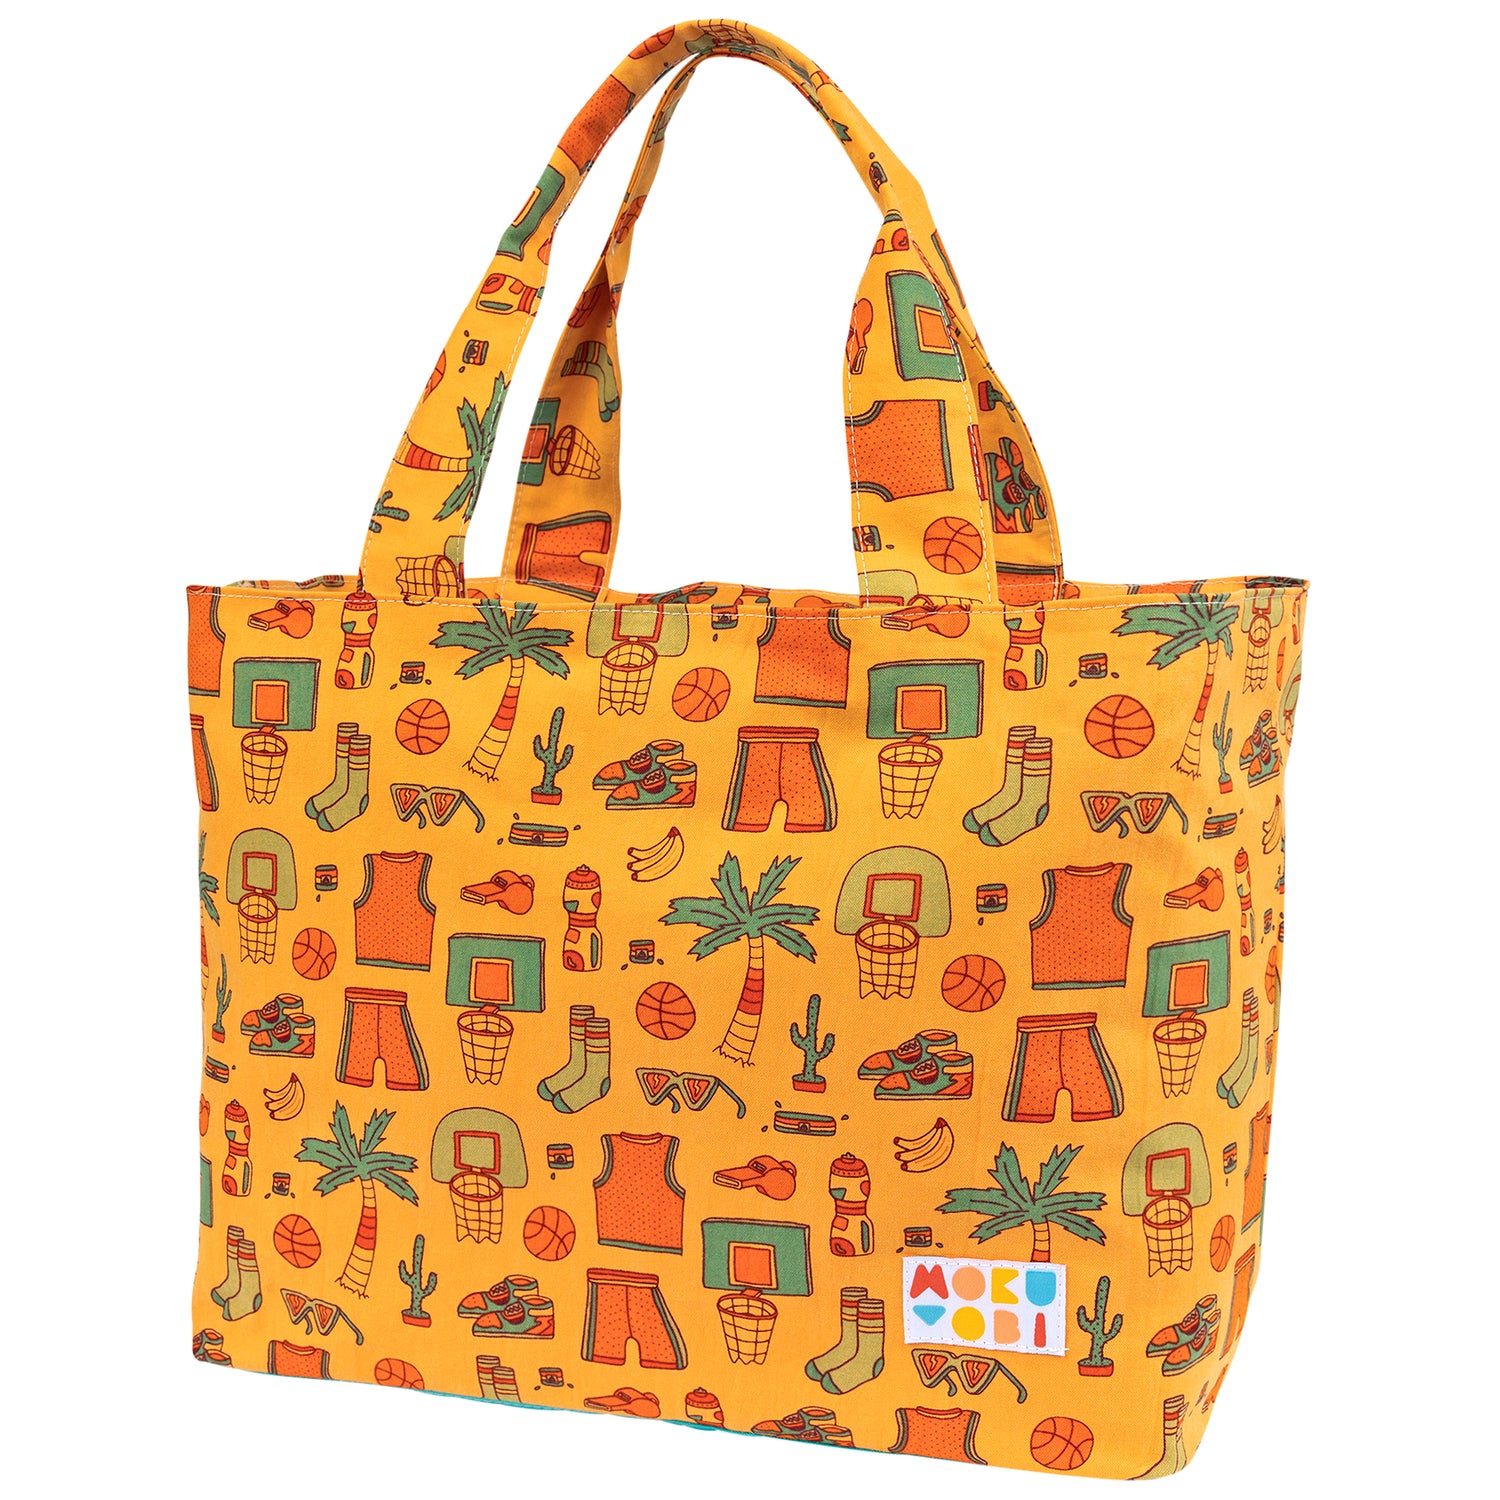 Large tote bag with colorful basketball inspired designs